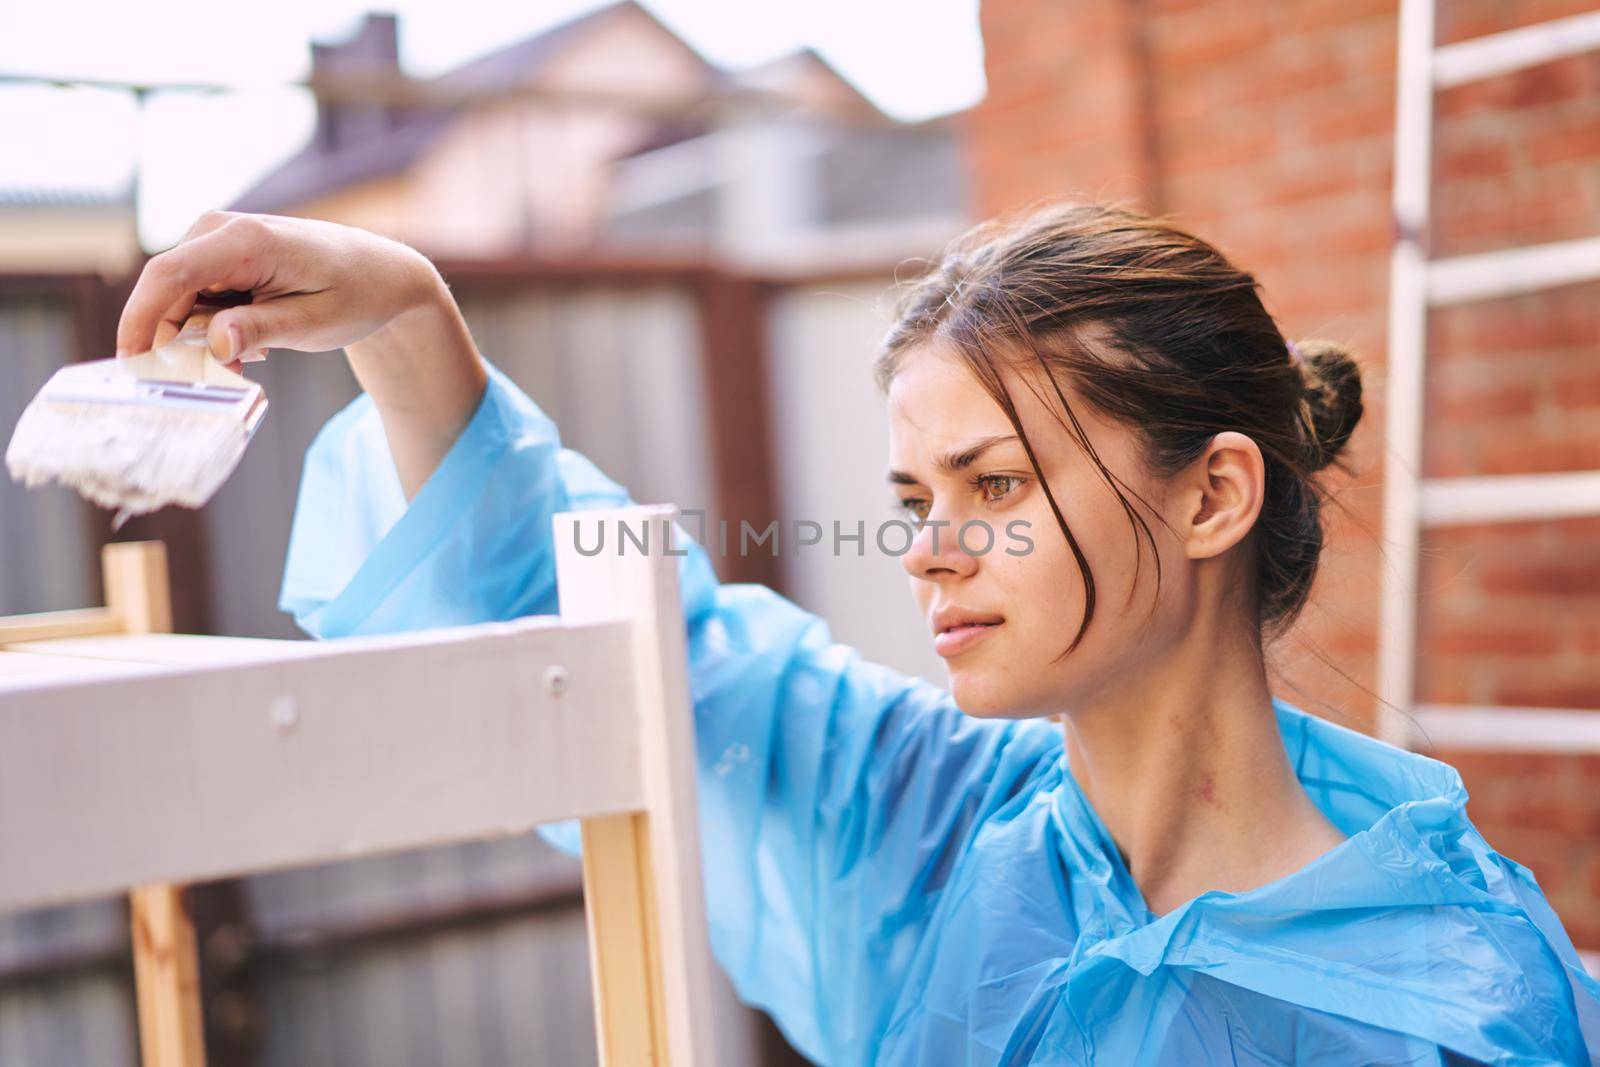 cheerful woman house painter in protective suit repairing home. High quality photo